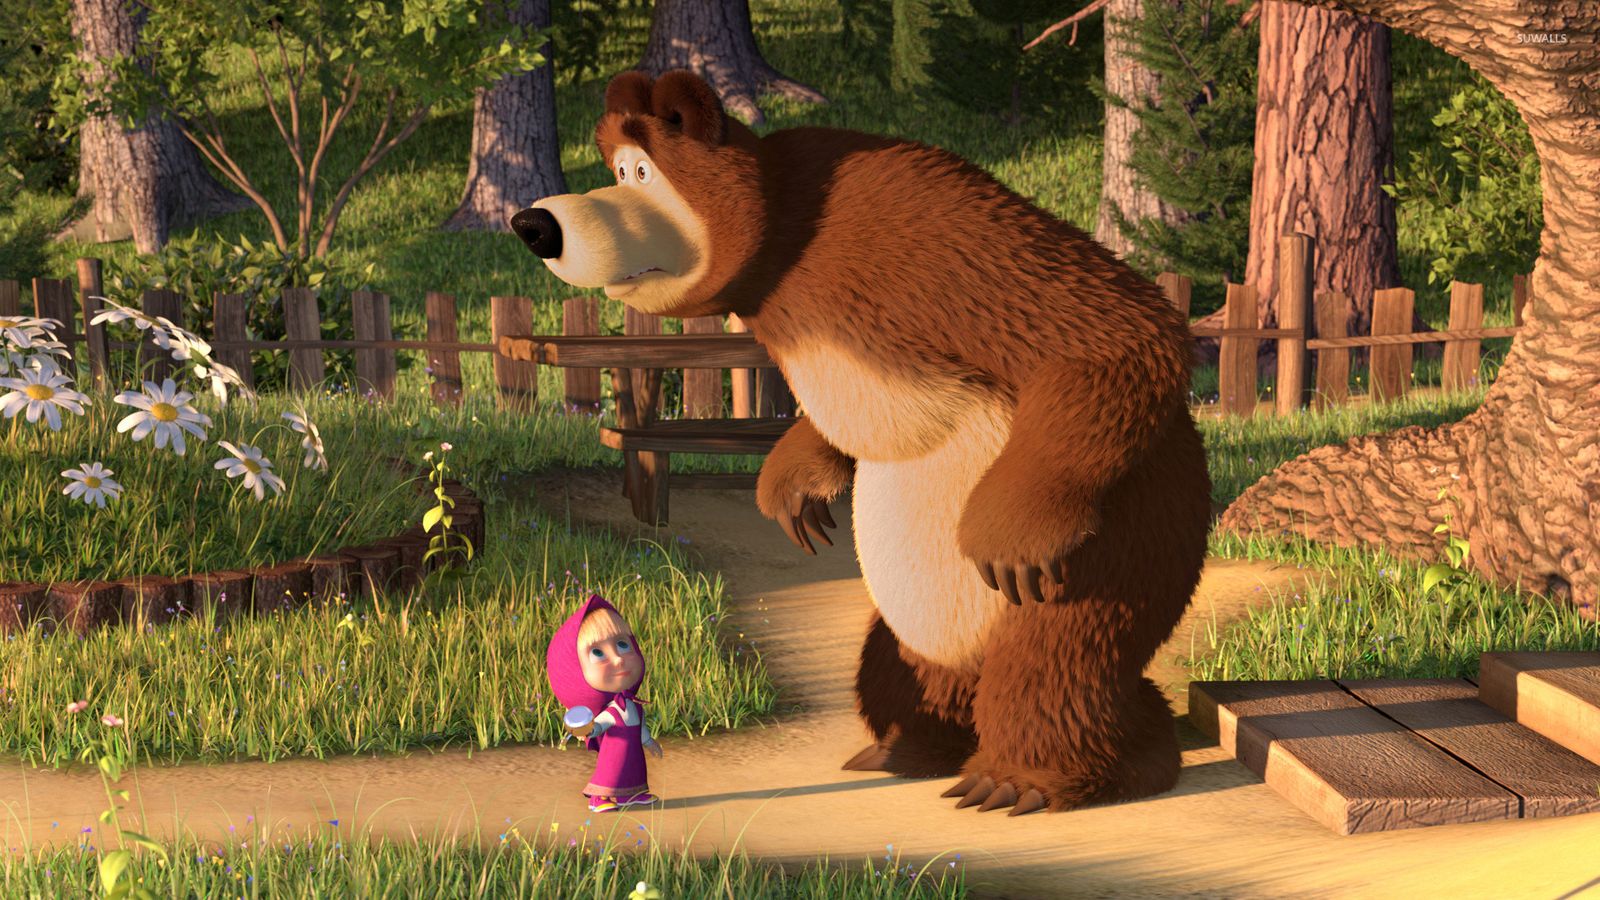 2021 Demand for Masha and the Bear | Parrot Analytics